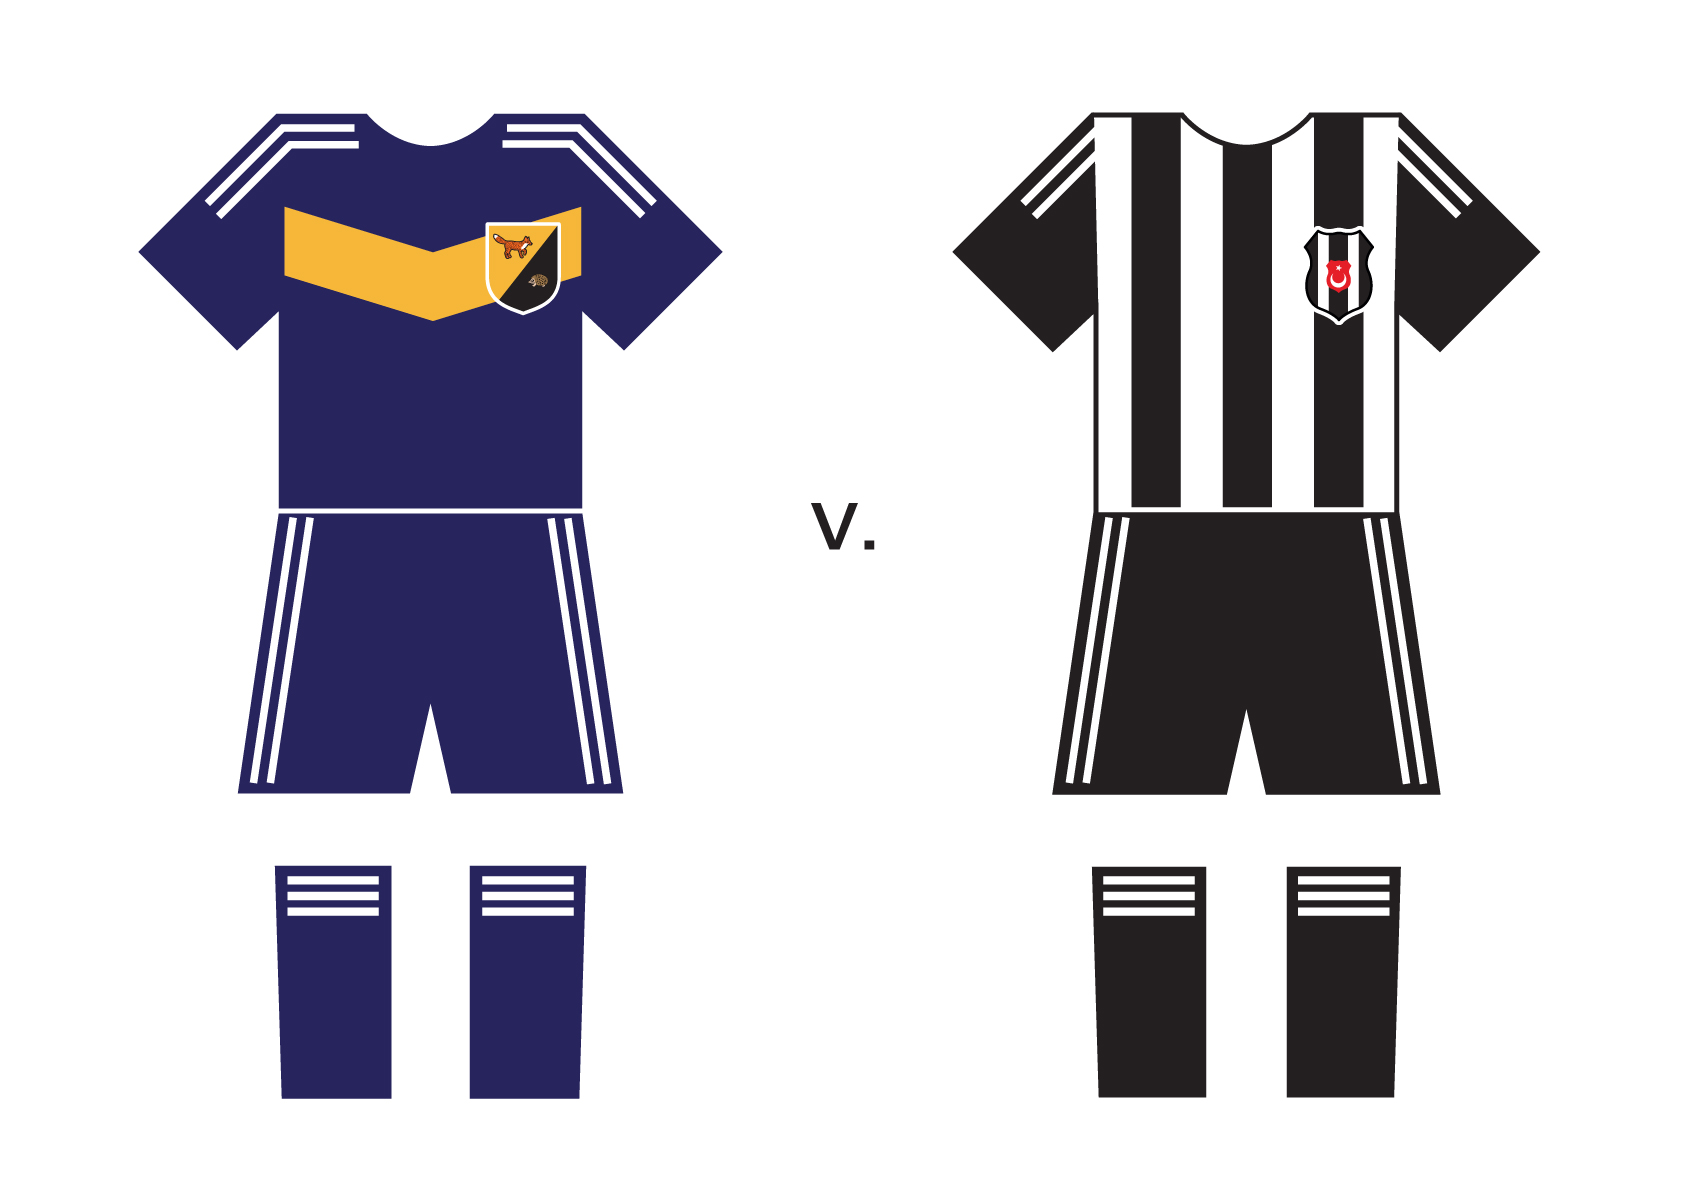 The front of a postcard which shows the the Cabinet Soccer Club’s uniforms versus those of the Beşiktaş Football Club. 